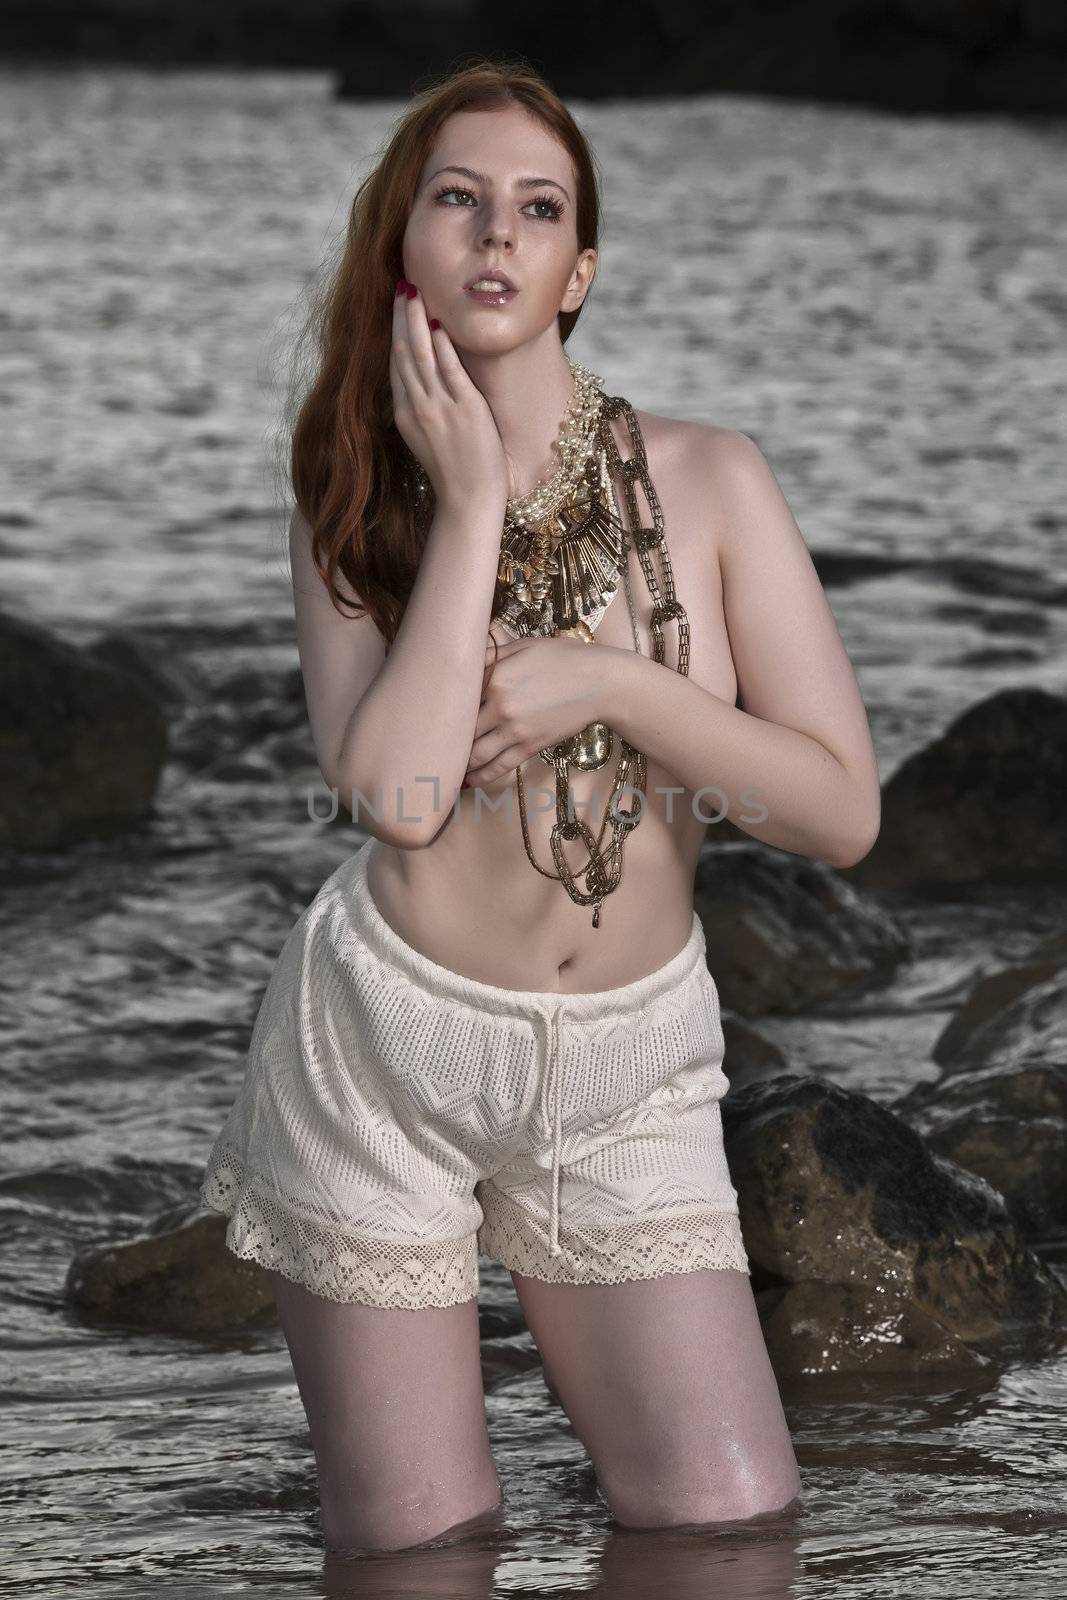 A beautiful woman with pale skin and red hair kneeling on a beach posing semi nude